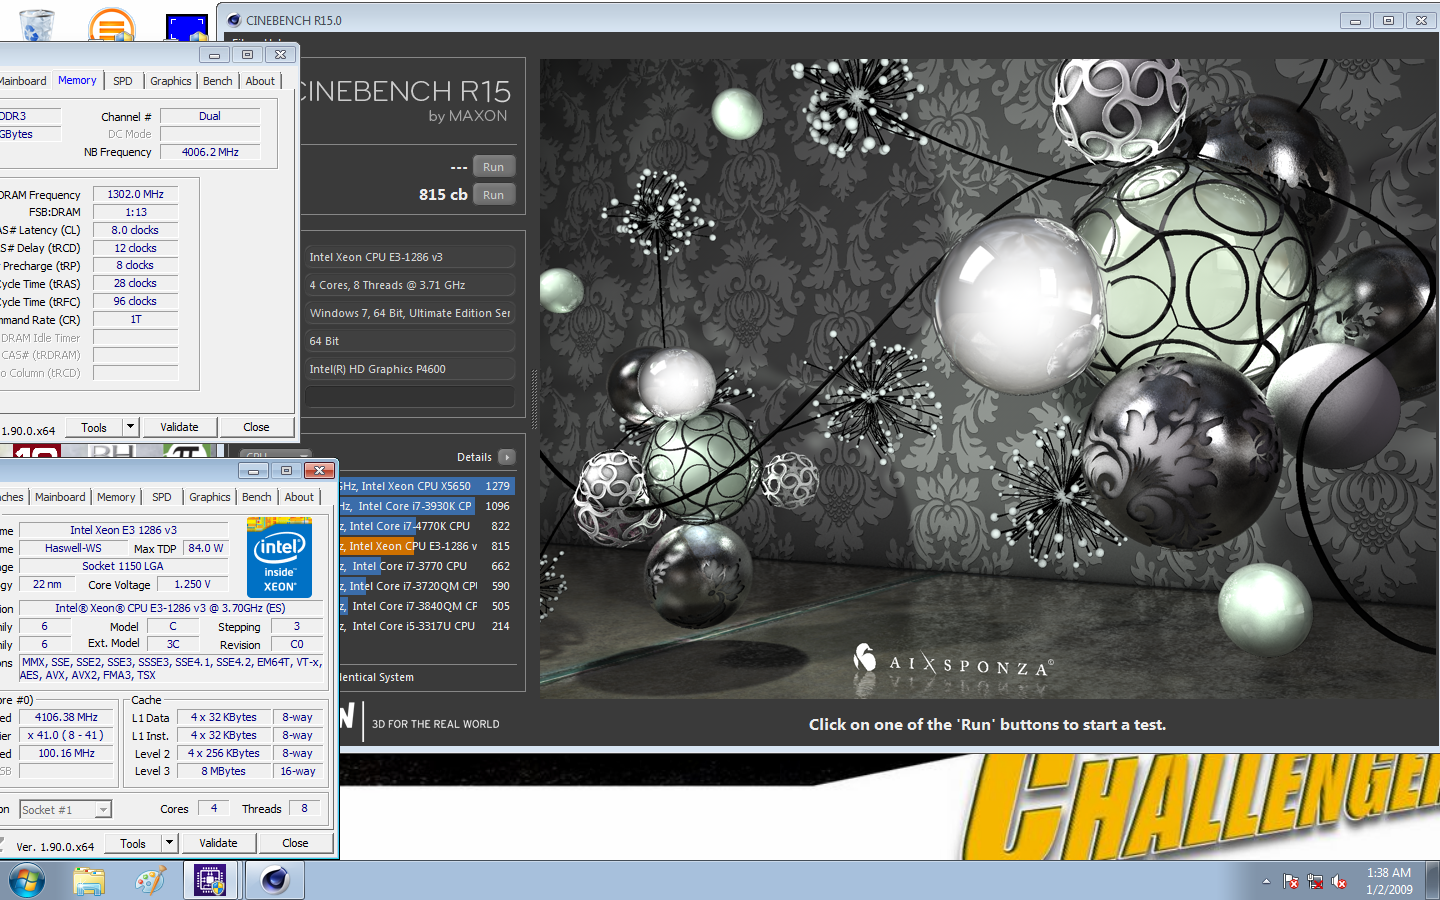 Voorwaarde Prematuur vermomming yosarianilives`s Cinebench - R15 score: 815 cb with a Xeon E3 1286 v3